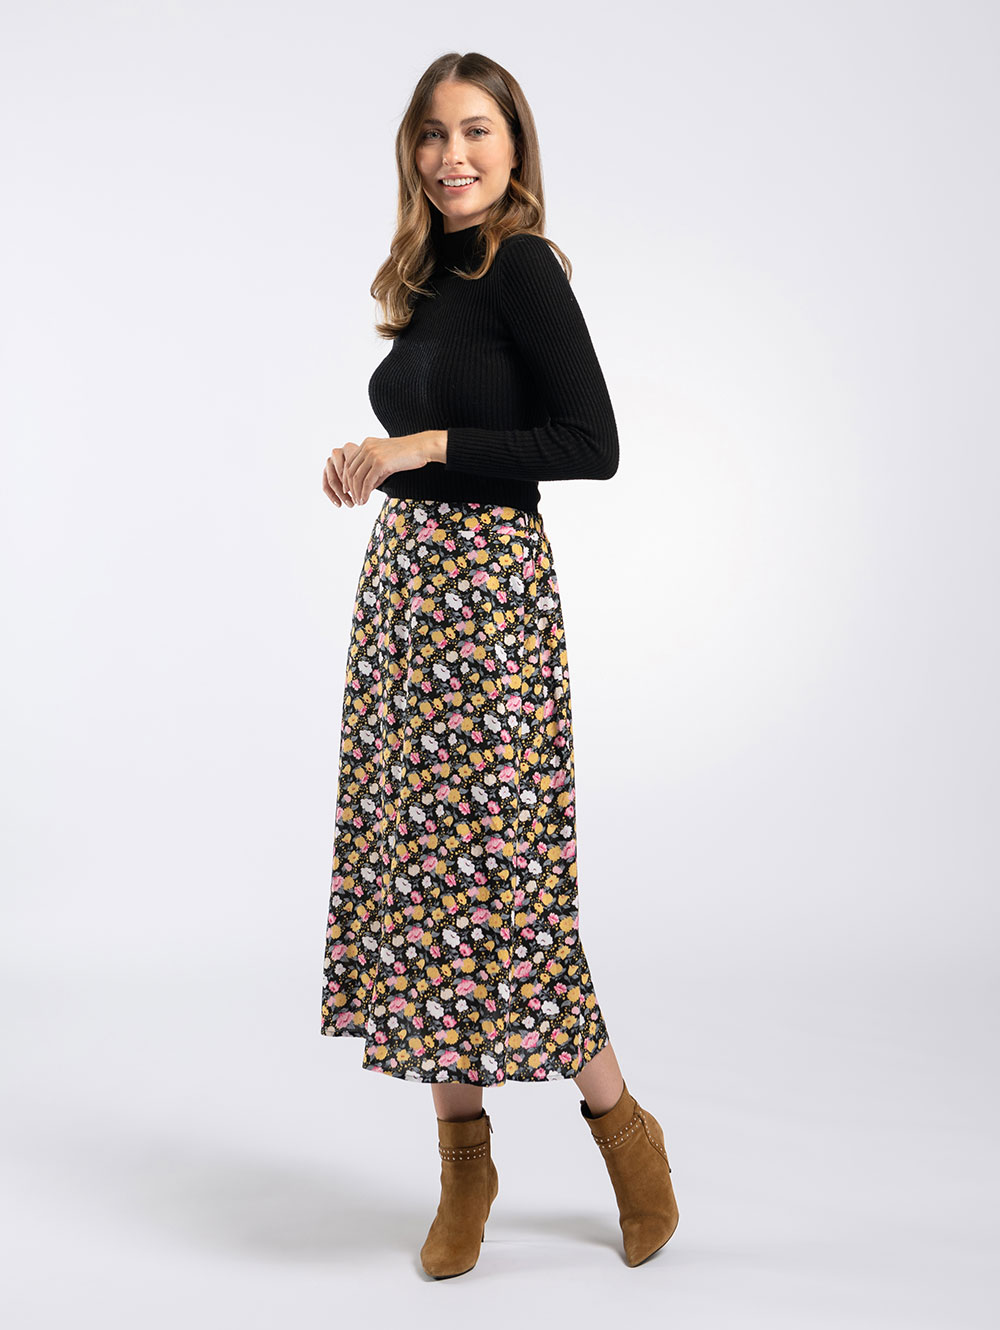 Pentlebay | Skirts | Women's Skirts | For A Brand New Day